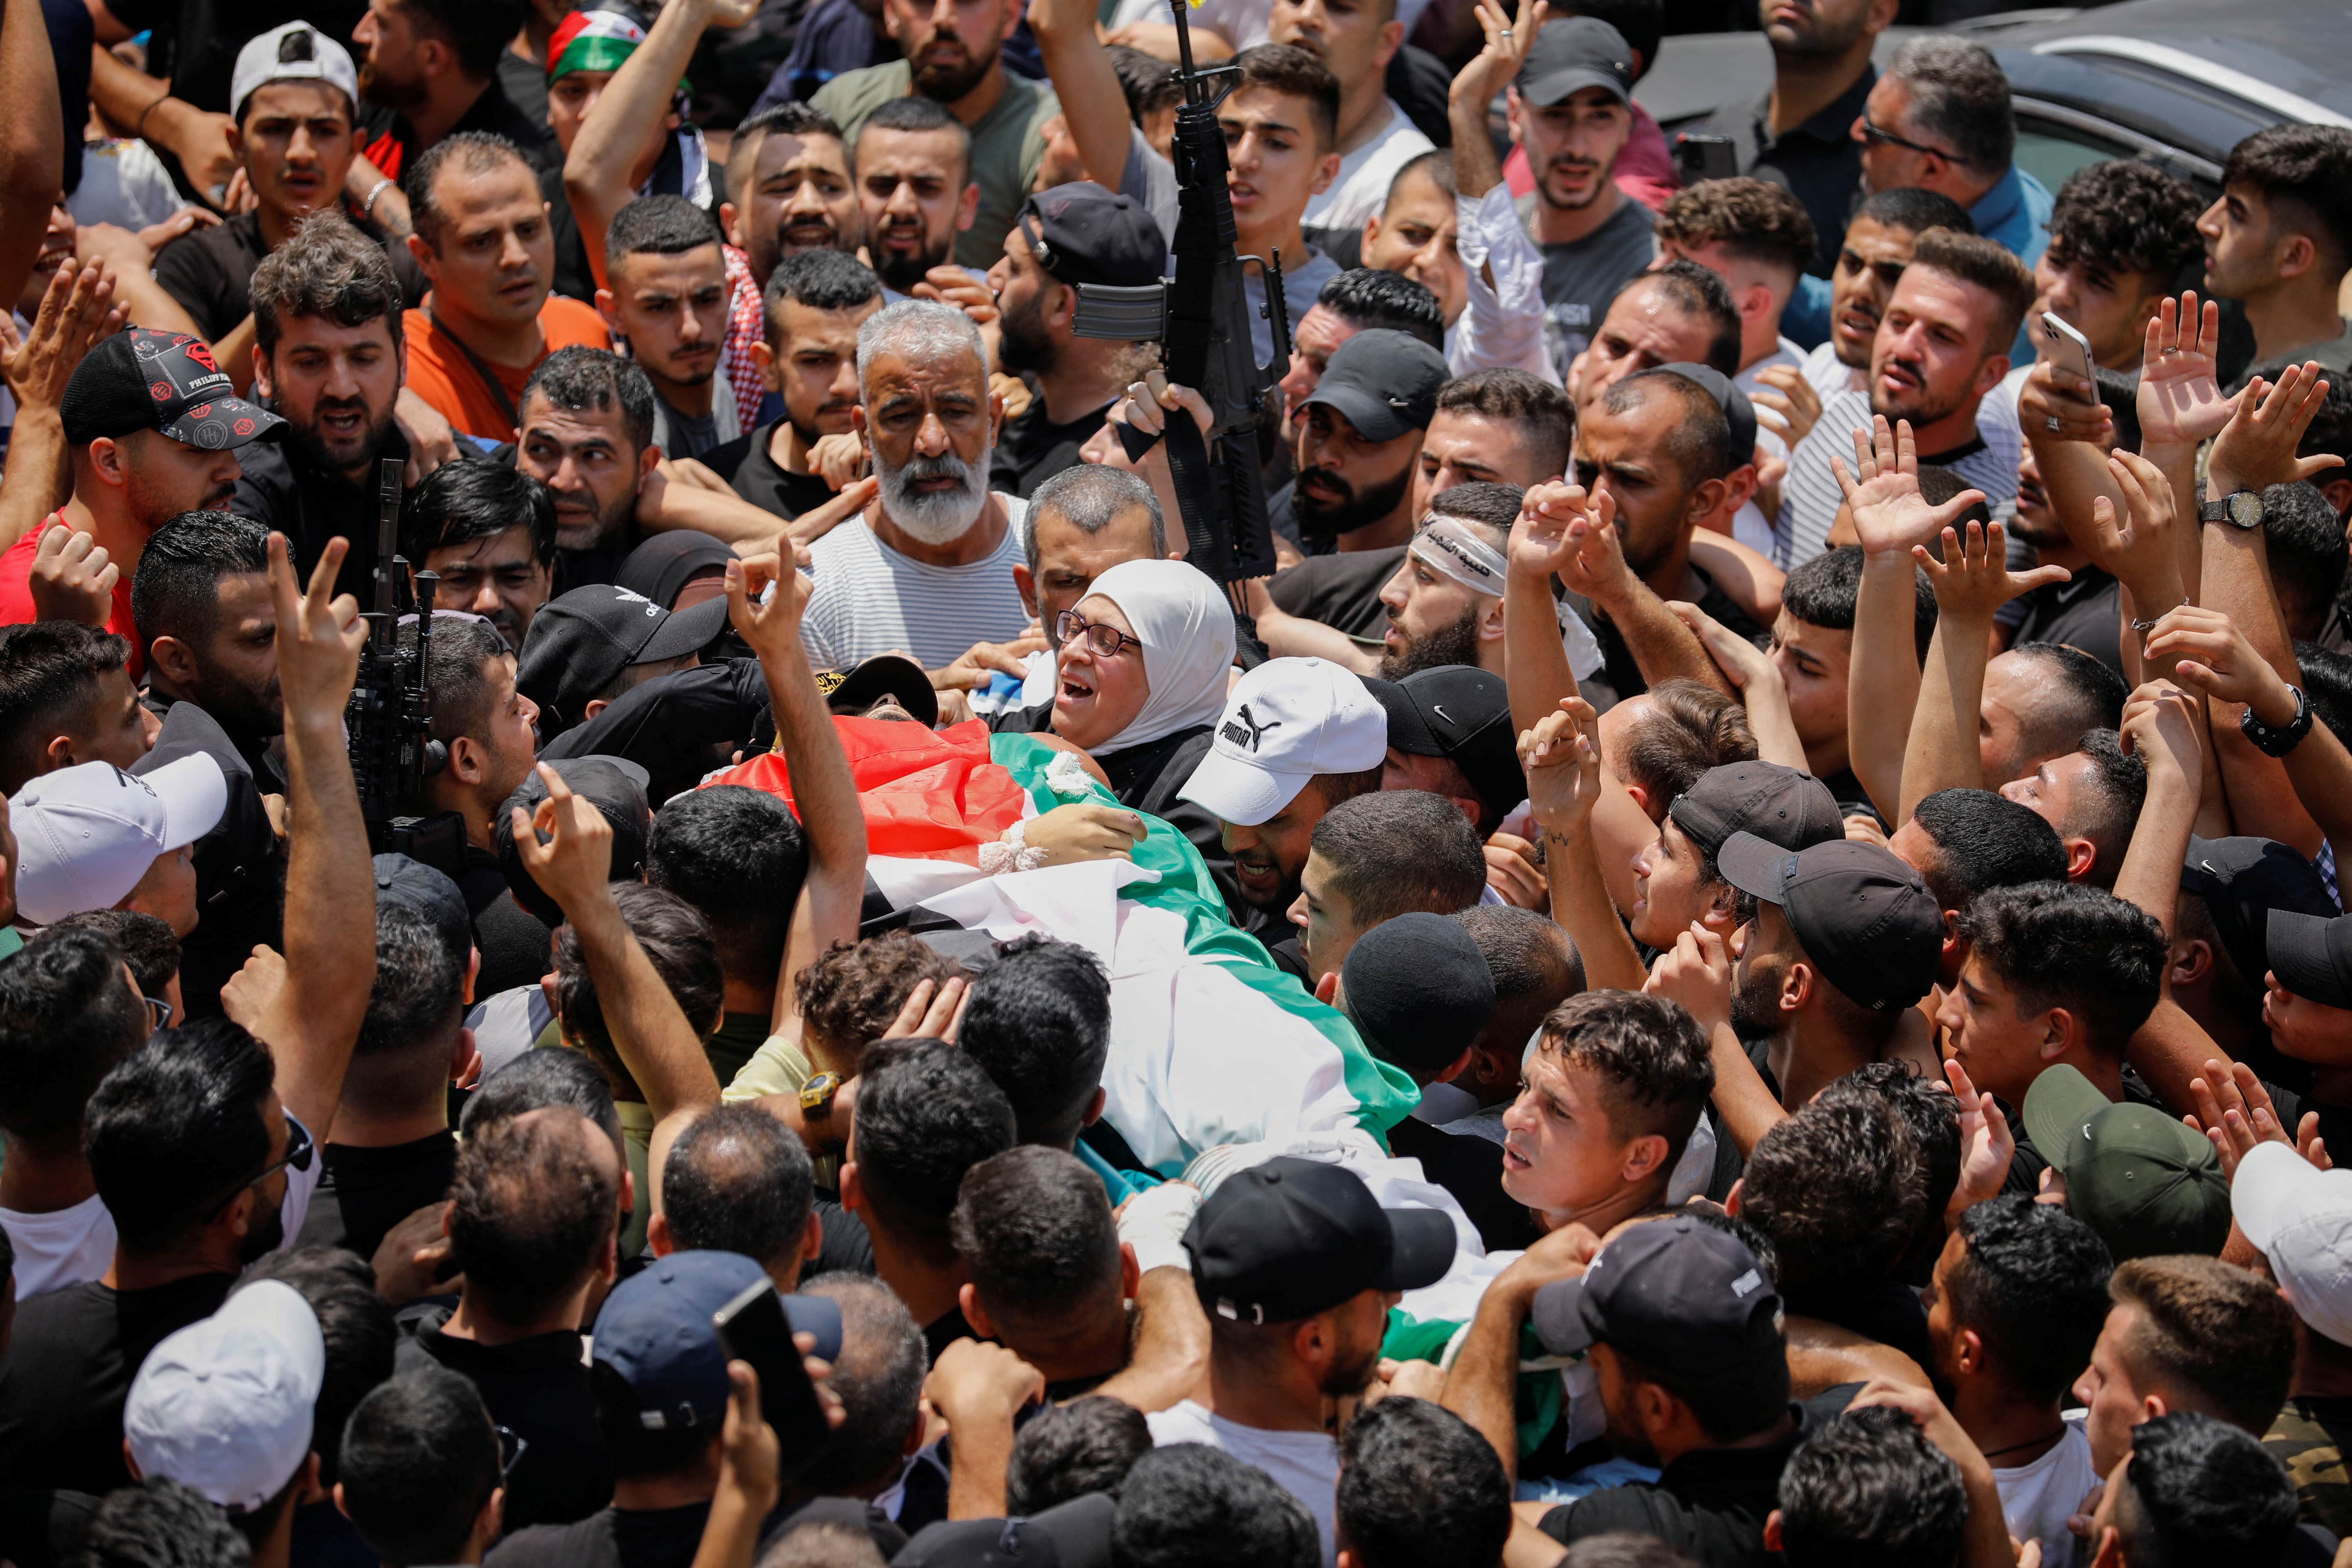 Mourners carry the body of Ibrahim al-Nabulsi who was killed by Israeli forces, during a funeral in Nablus in the Israeli-occupied West Bank 9 August 2022 (Reuters)